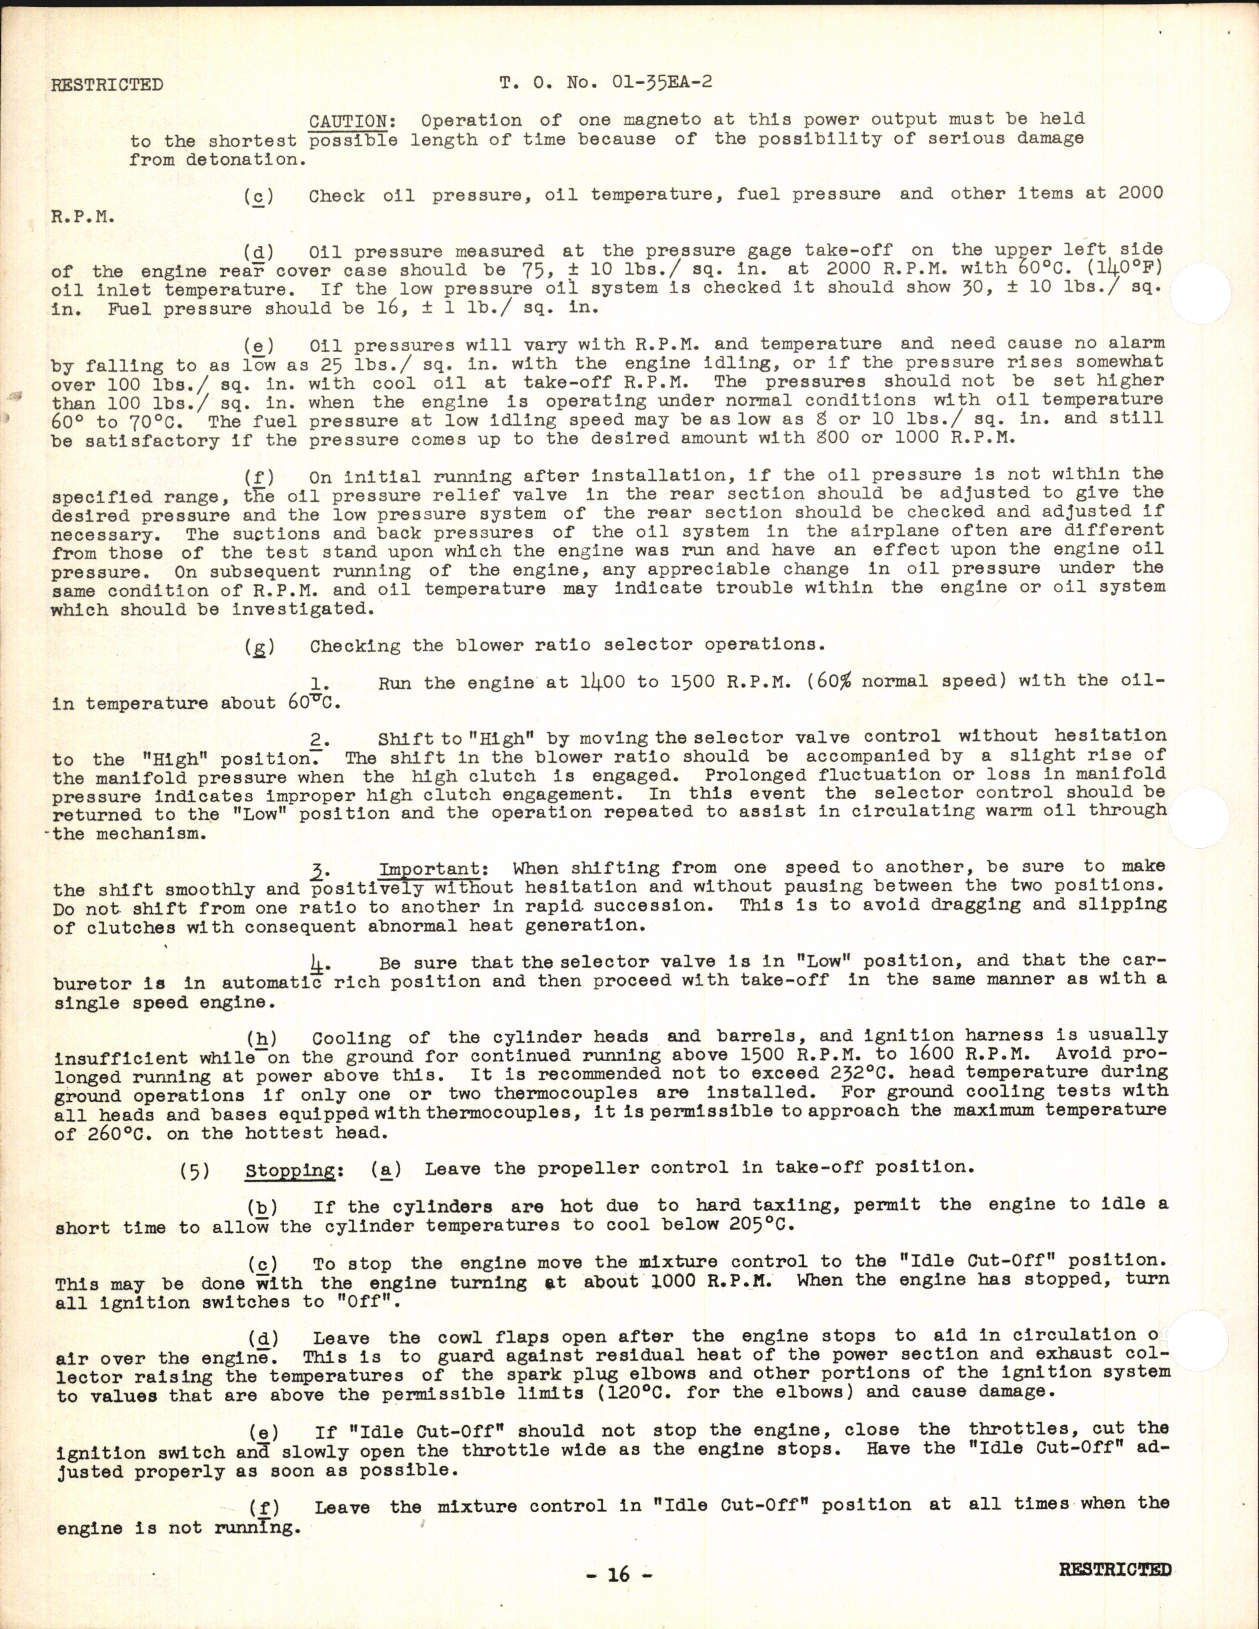 Sample page 8 from AirCorps Library document: Erection and Maintenance Instructions for RB-26, B-26A, and B-26B